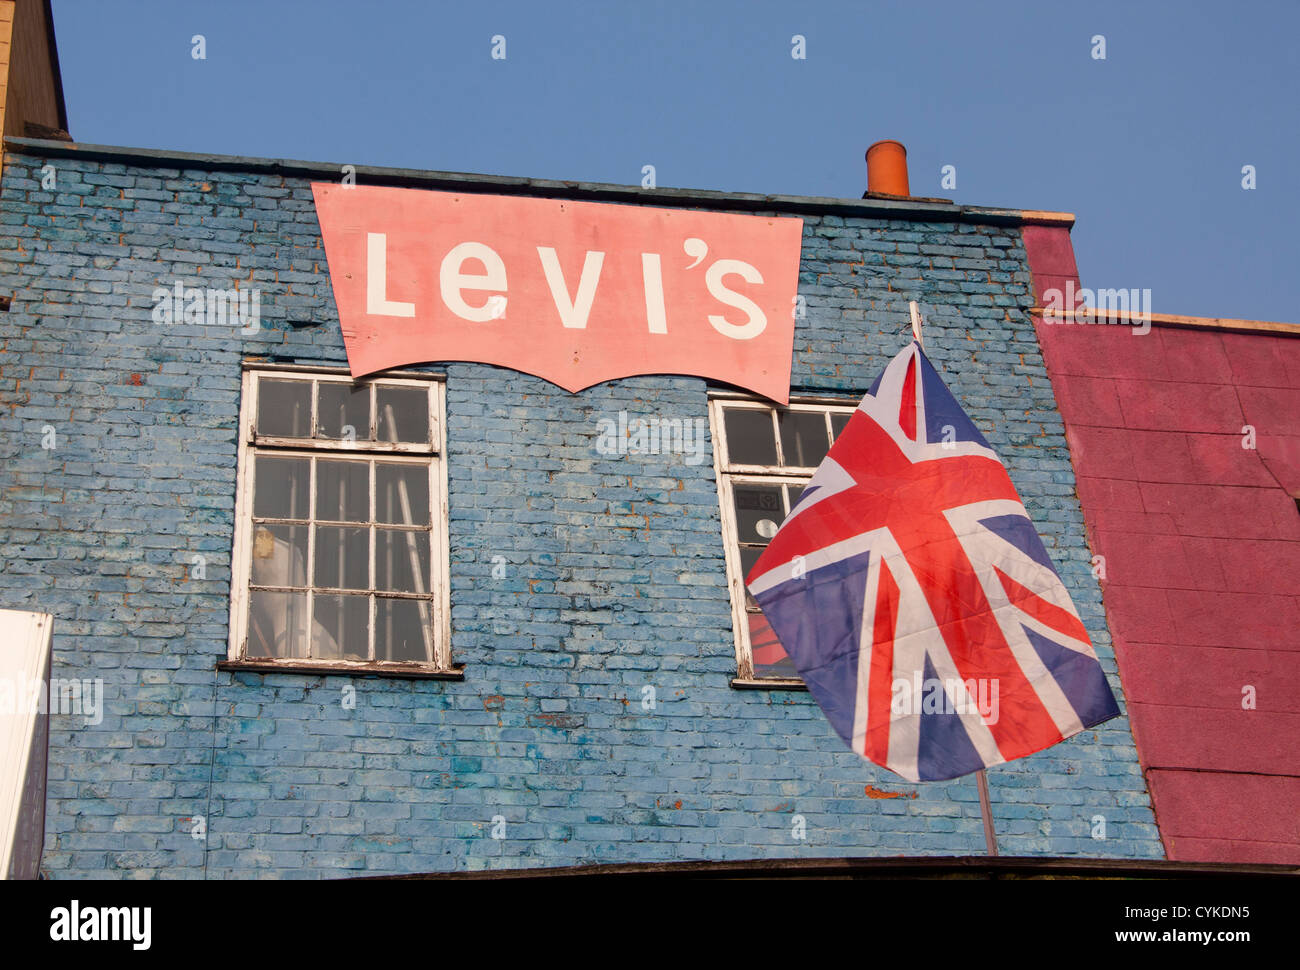 Shop building front on Camden High Street with painted Levi's jeans logo and Unon Jack flag London England UK Stock Photo